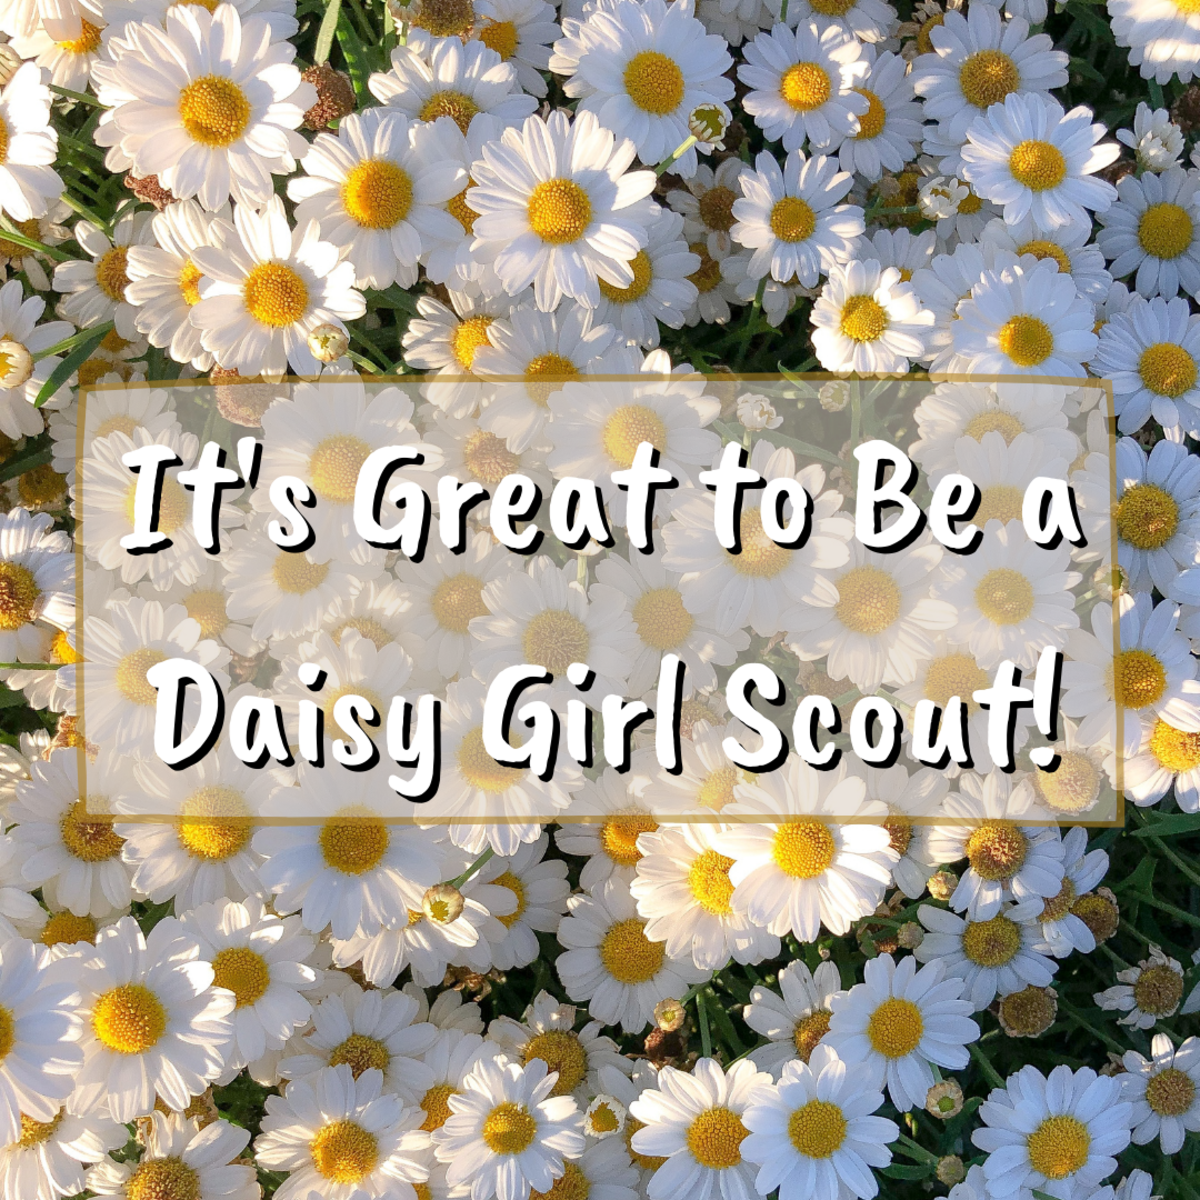 Girl Scout Daisy Event Ideas